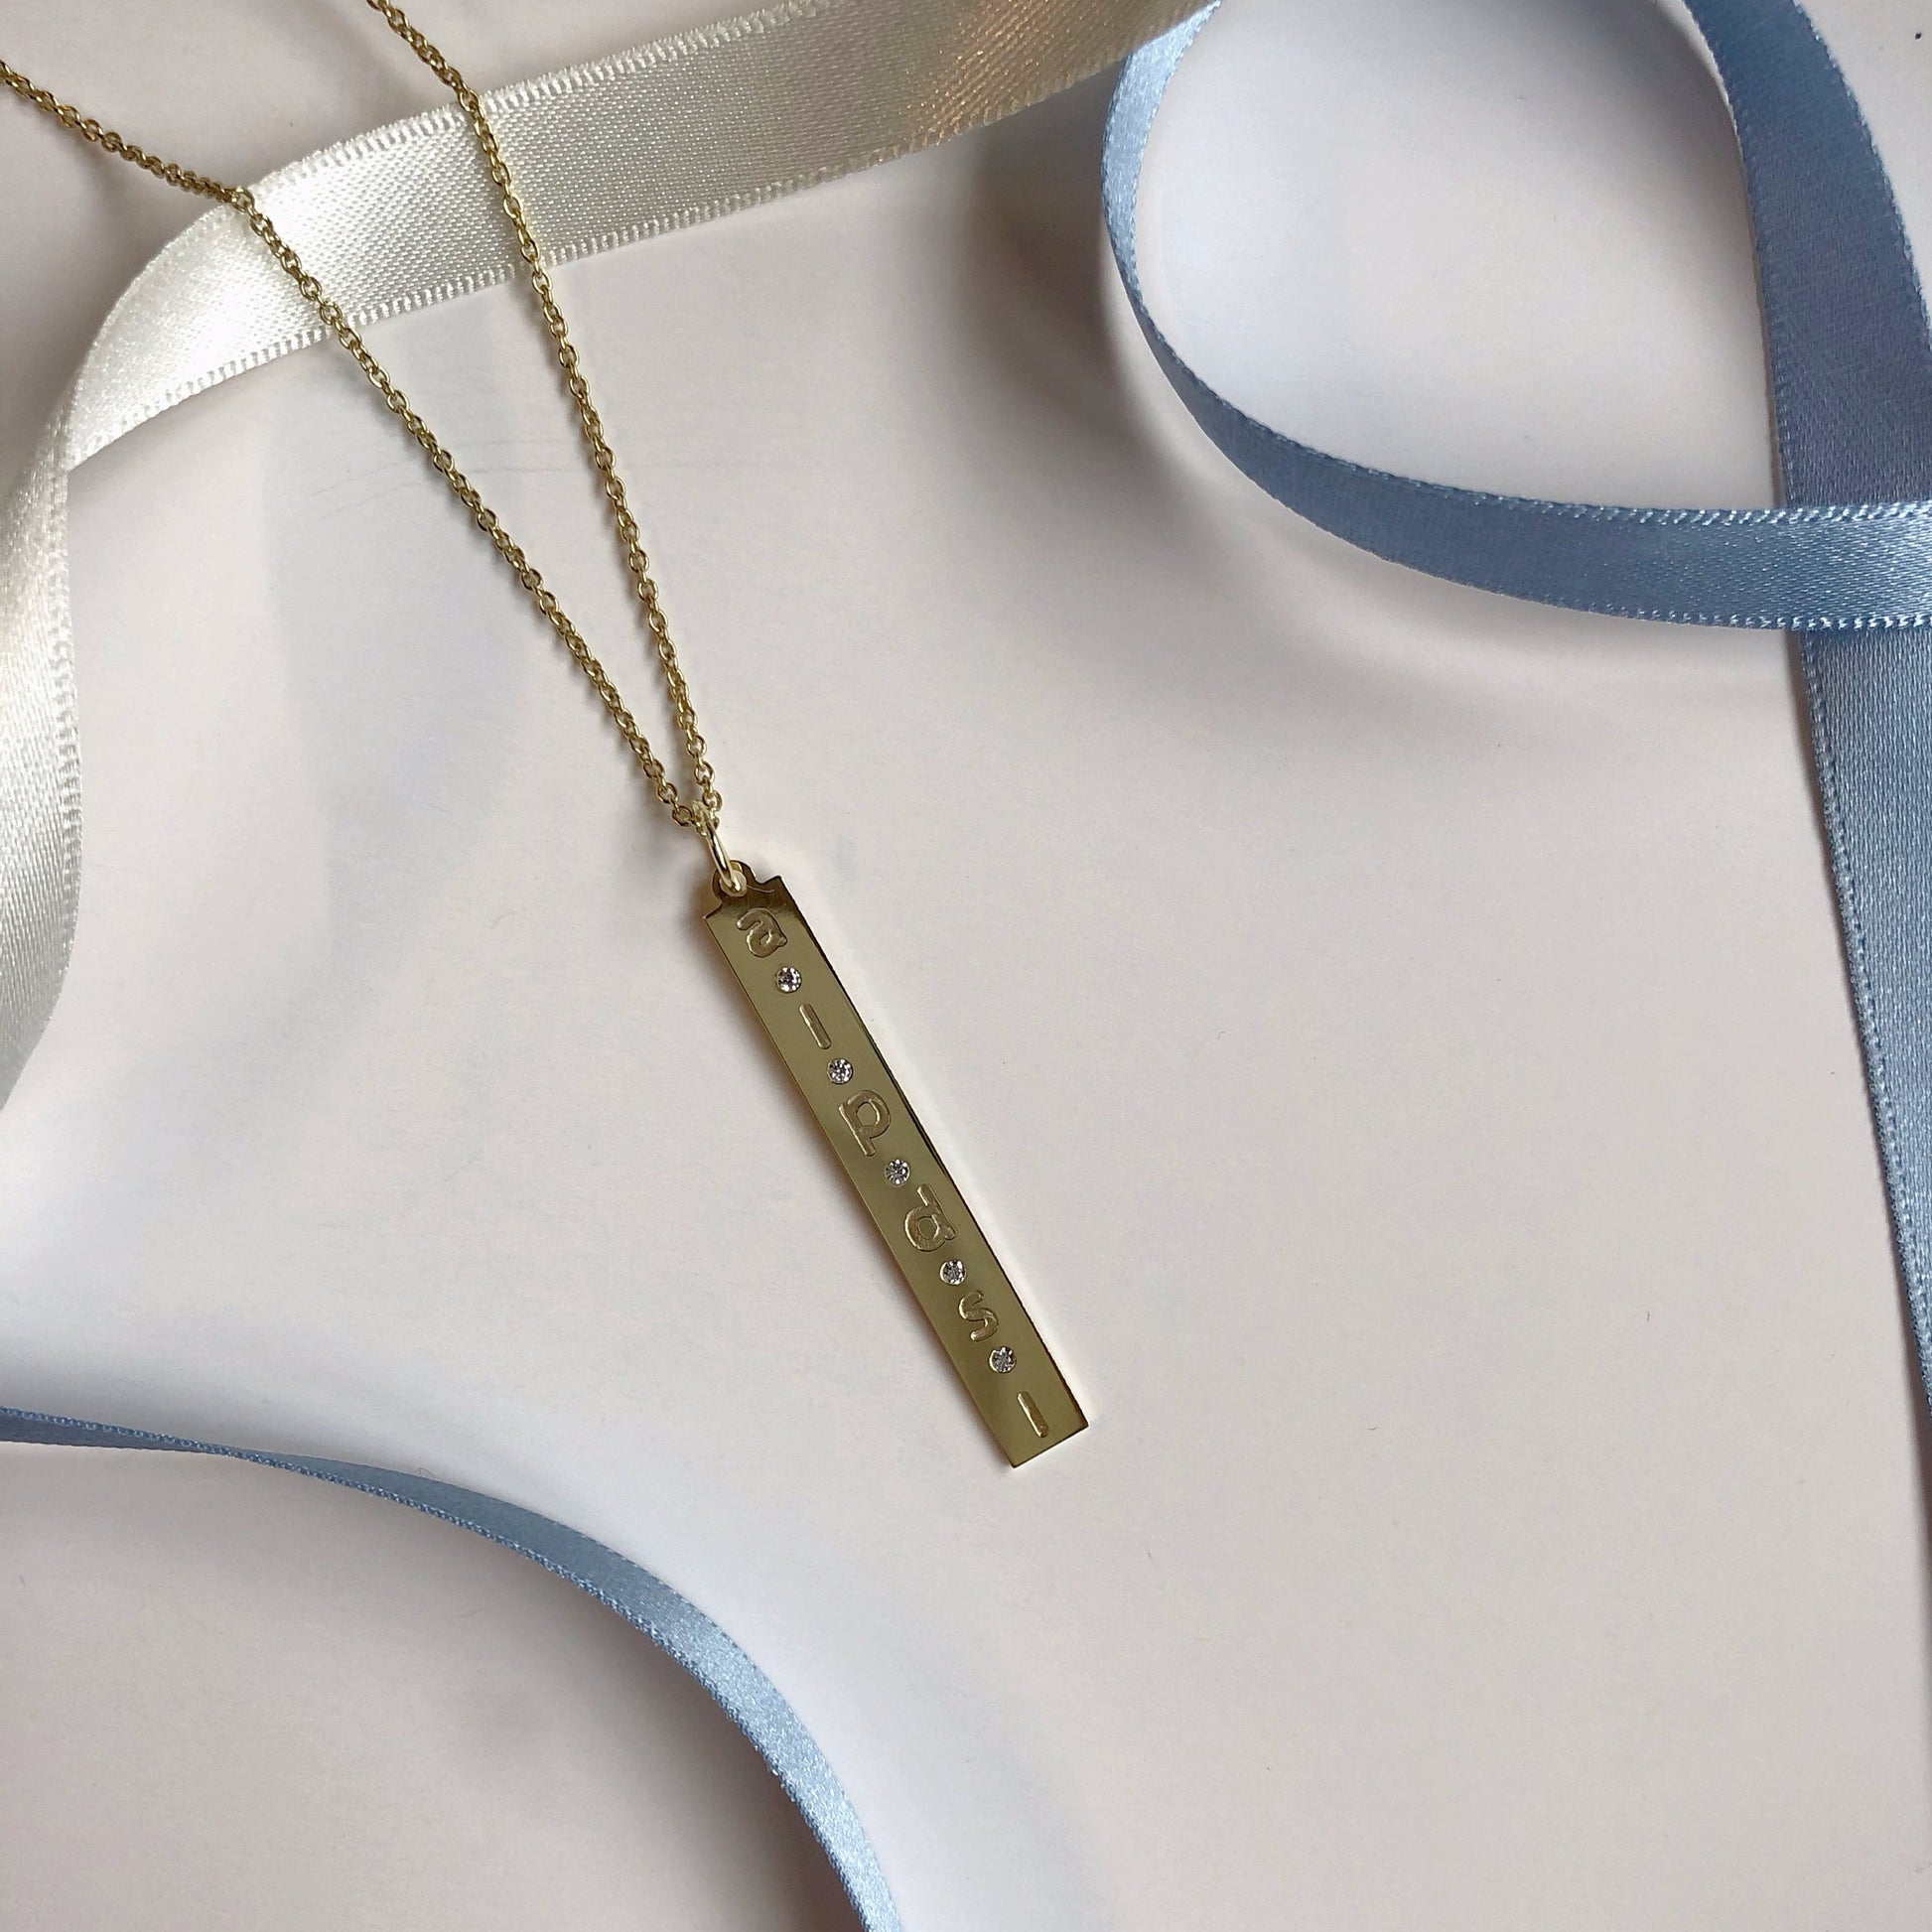 LE TAG necklace - BYVELA jewellery